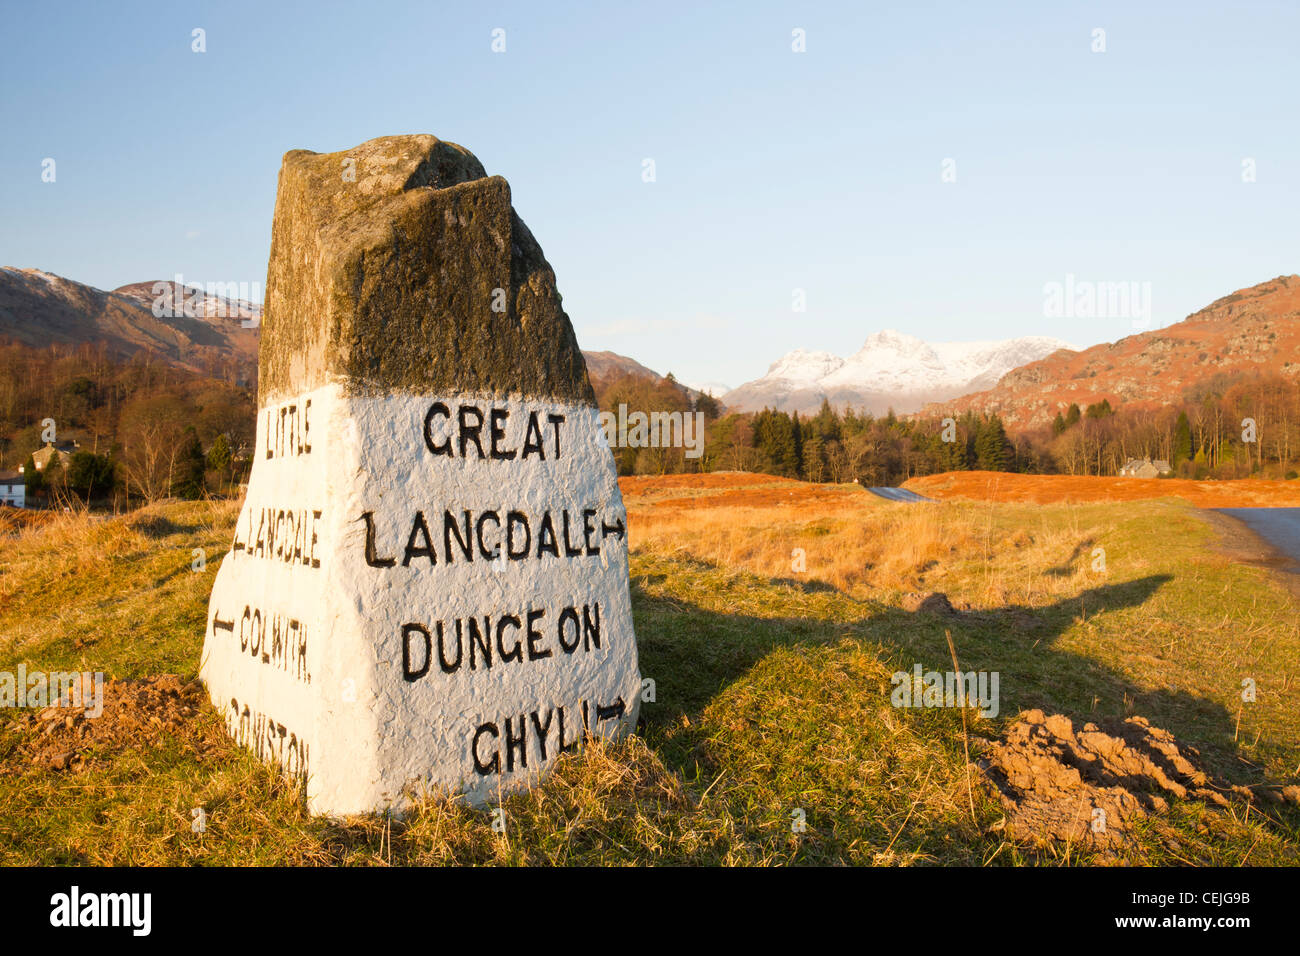 An old stone road sign in the Langdale valley at Elter water in the Lake District, UK, looking towards the Langdale Pikes. Stock Photo